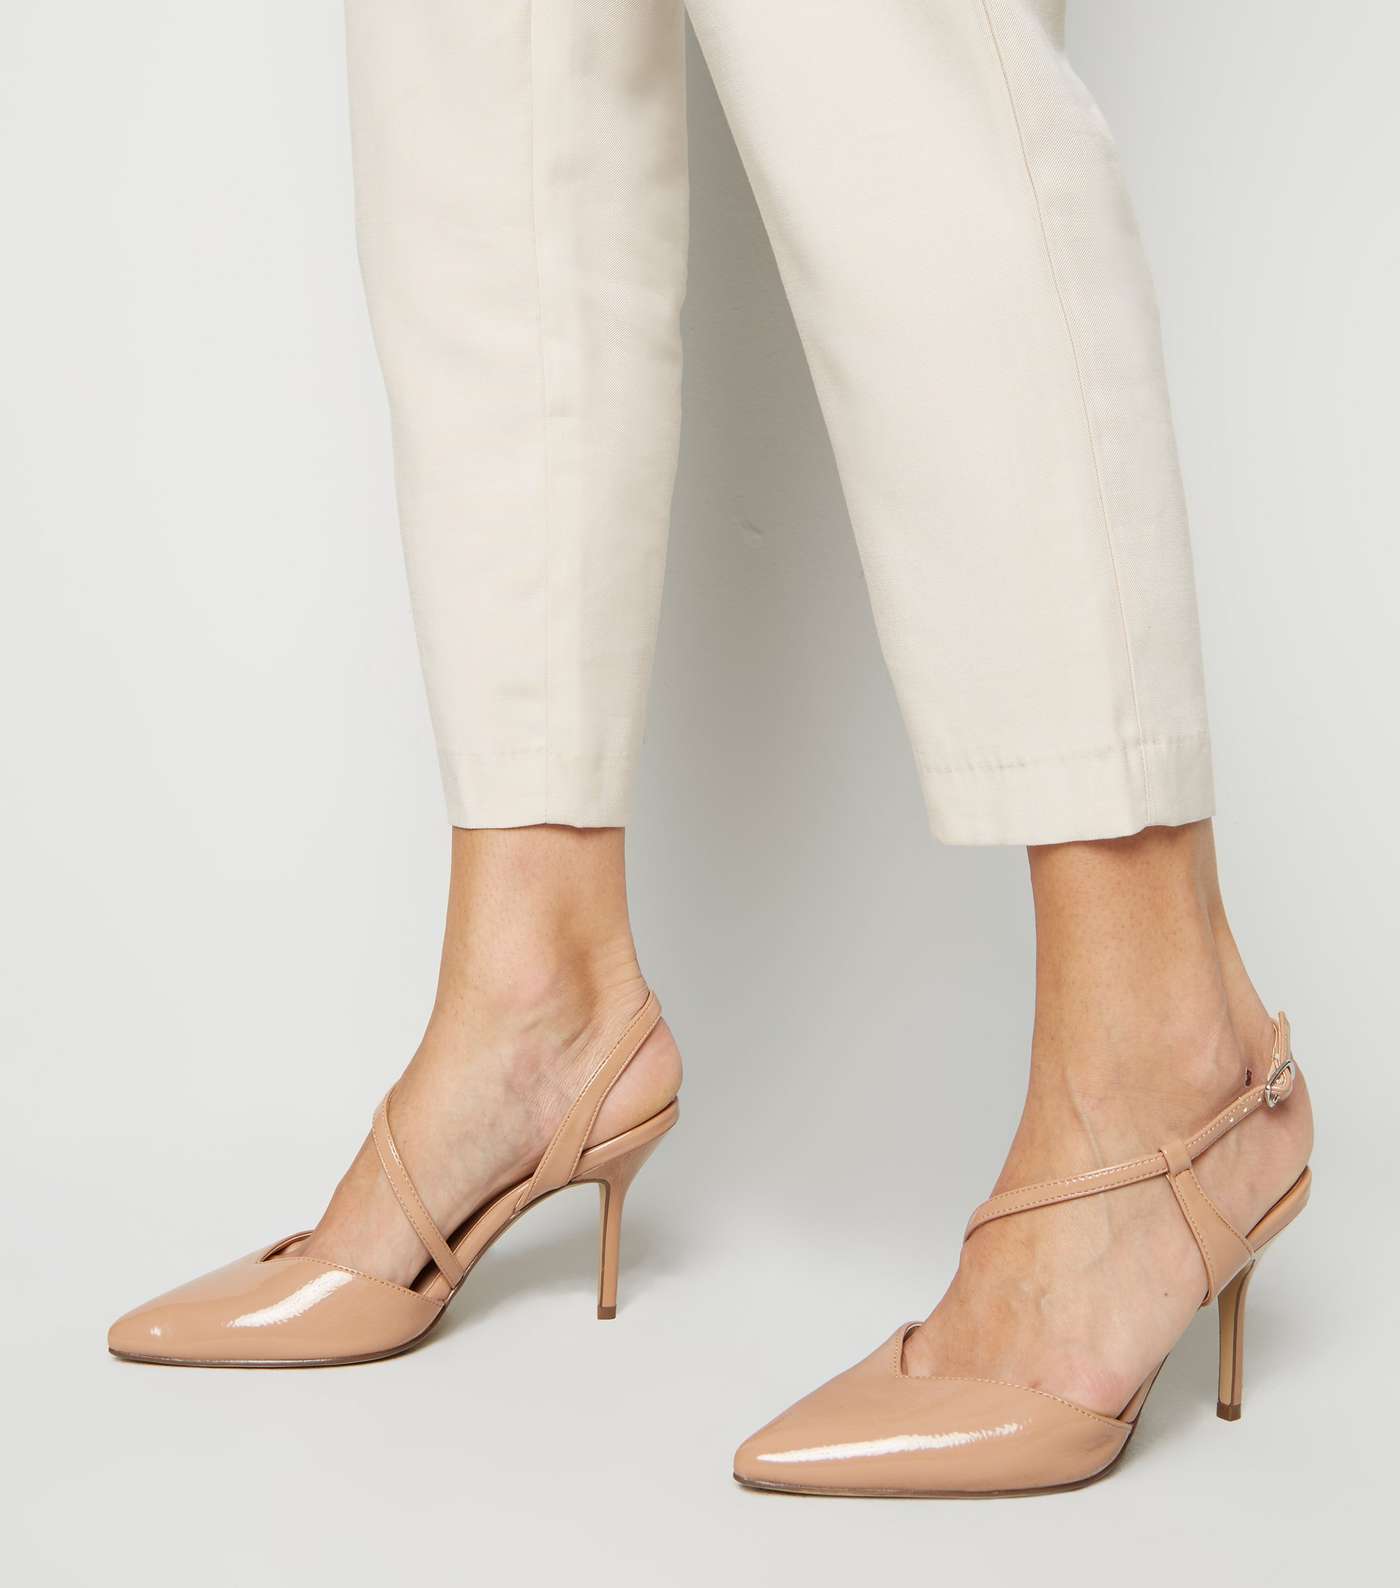 Camel Patent Strappy Pointed Stiletto Courts Image 2